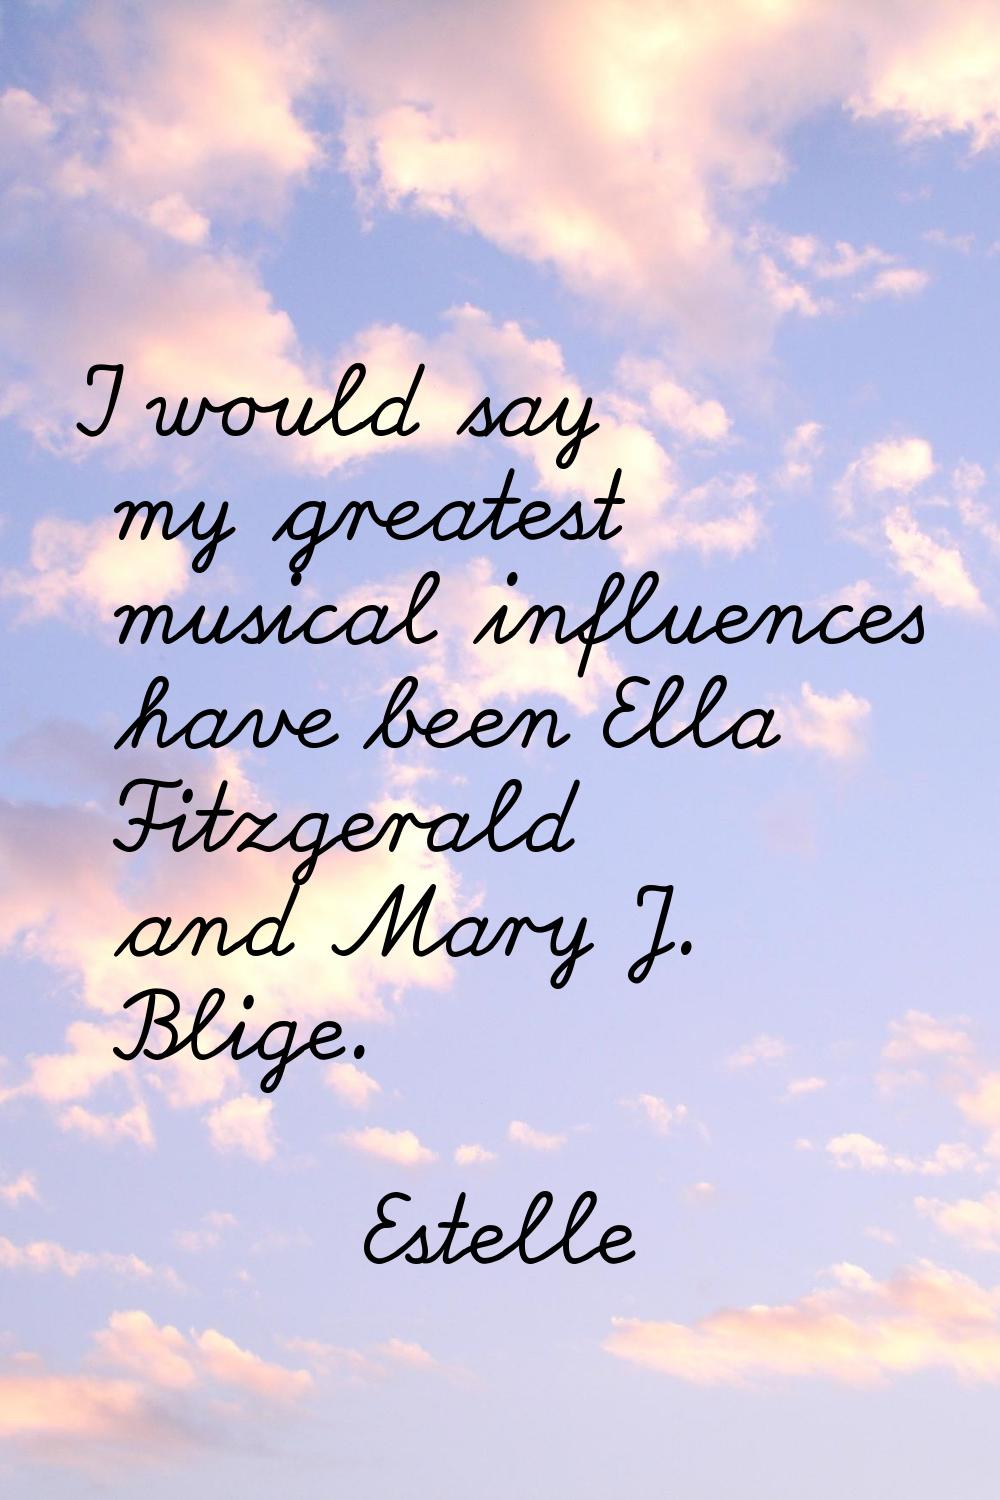 I would say my greatest musical influences have been Ella Fitzgerald and Mary J. Blige.